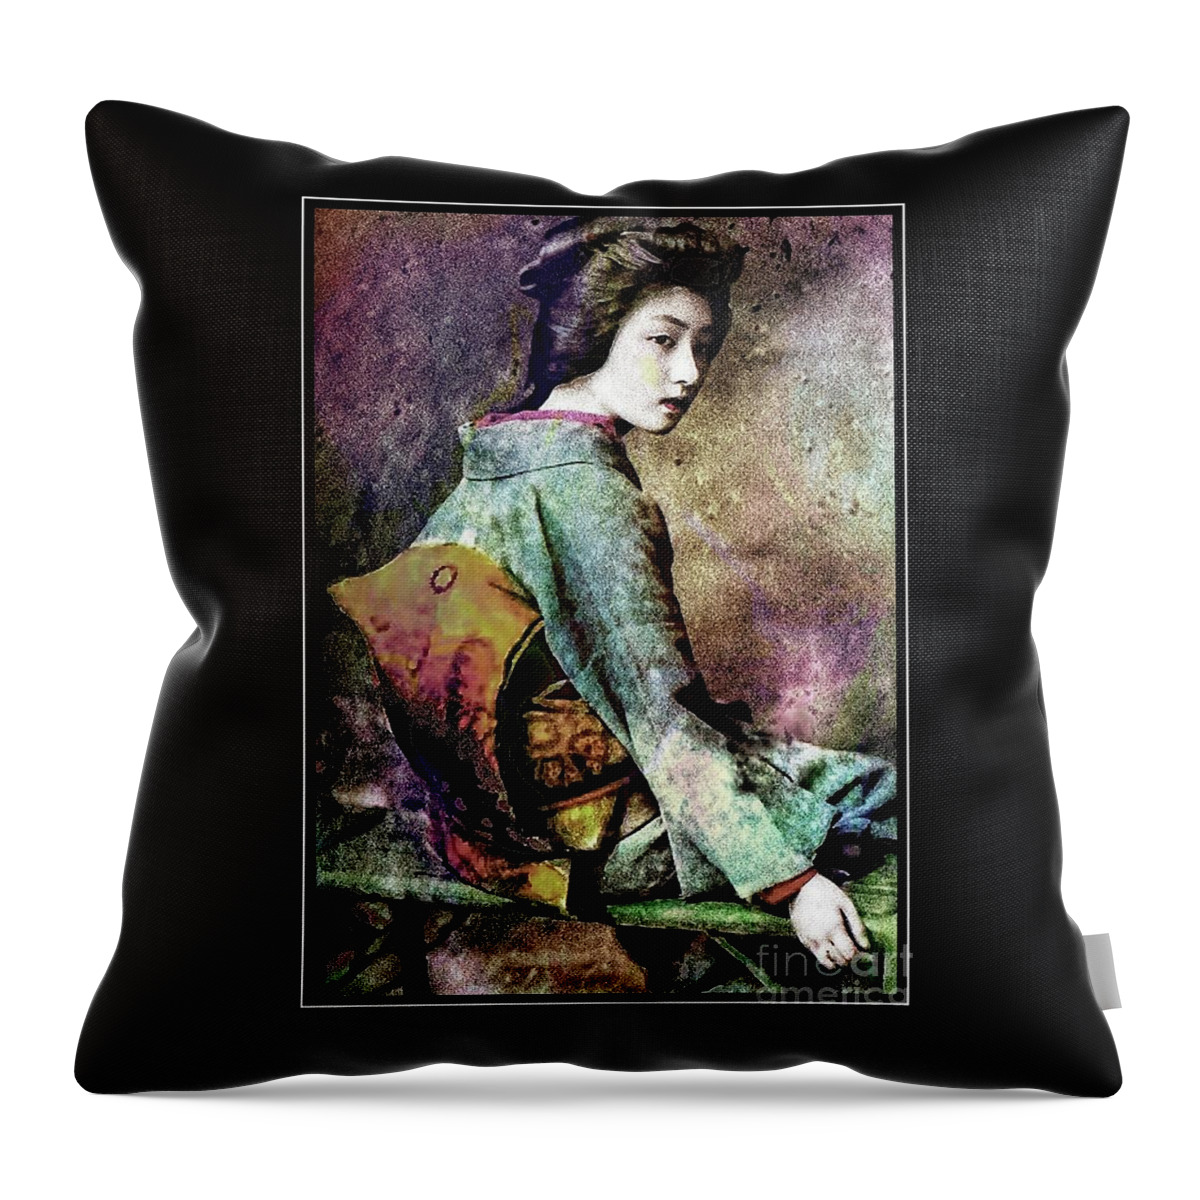 Japanese Throw Pillow featuring the photograph The Geisha Girl - Vintage Portrait by Ian Gledhill